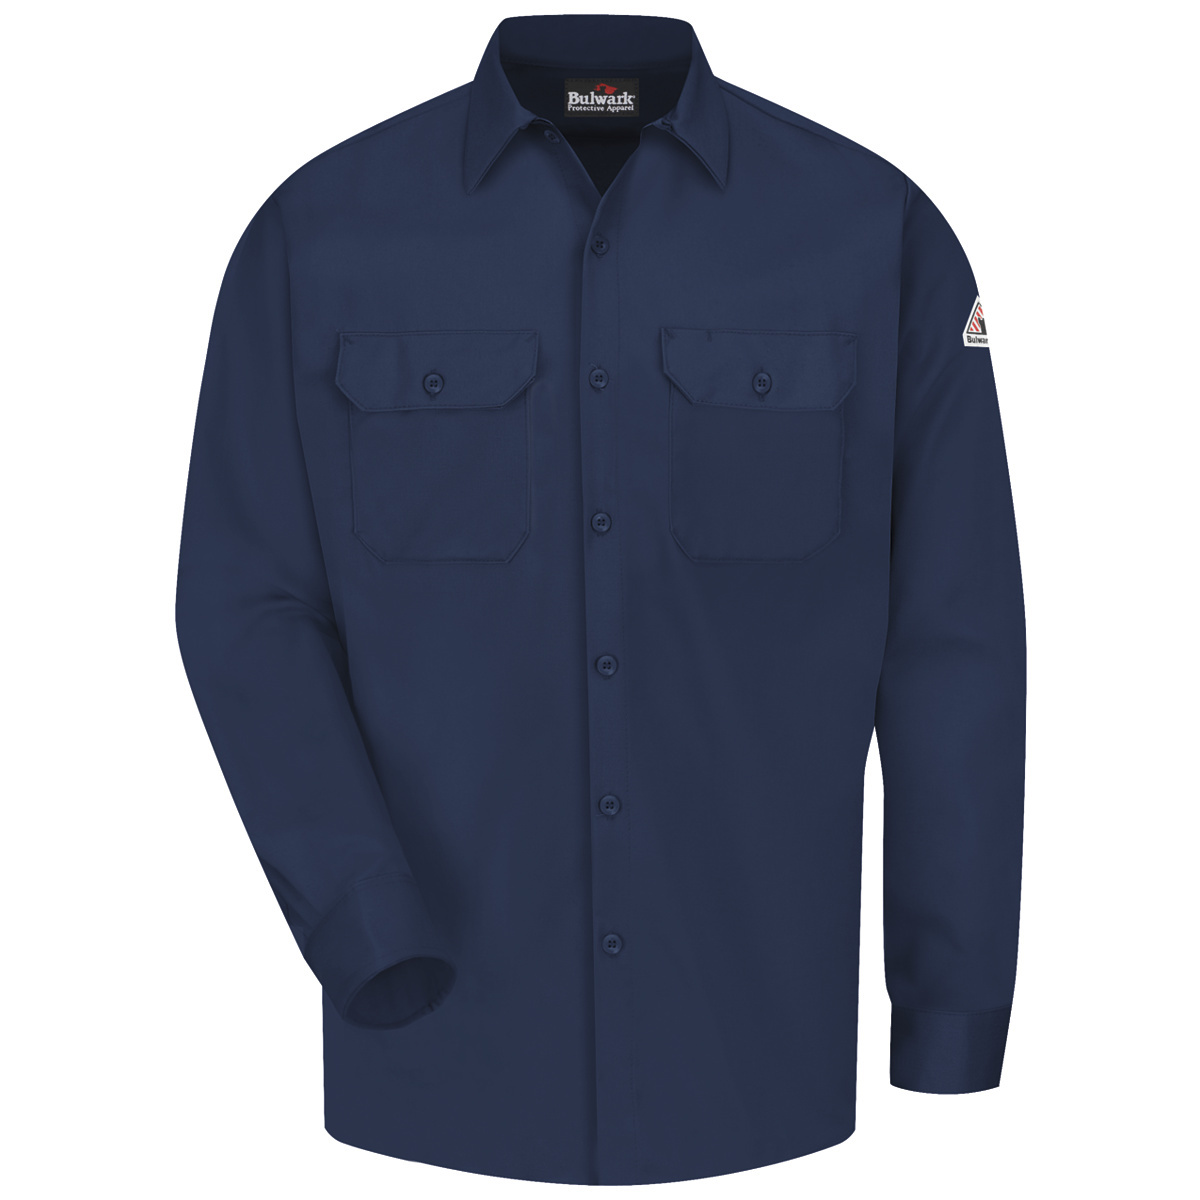 Bulwark® 3X Tall Navy Blue Westex Ultrasoft®/Cotton/Nylon Flame Resistant Work Shirt With Button Front Closure